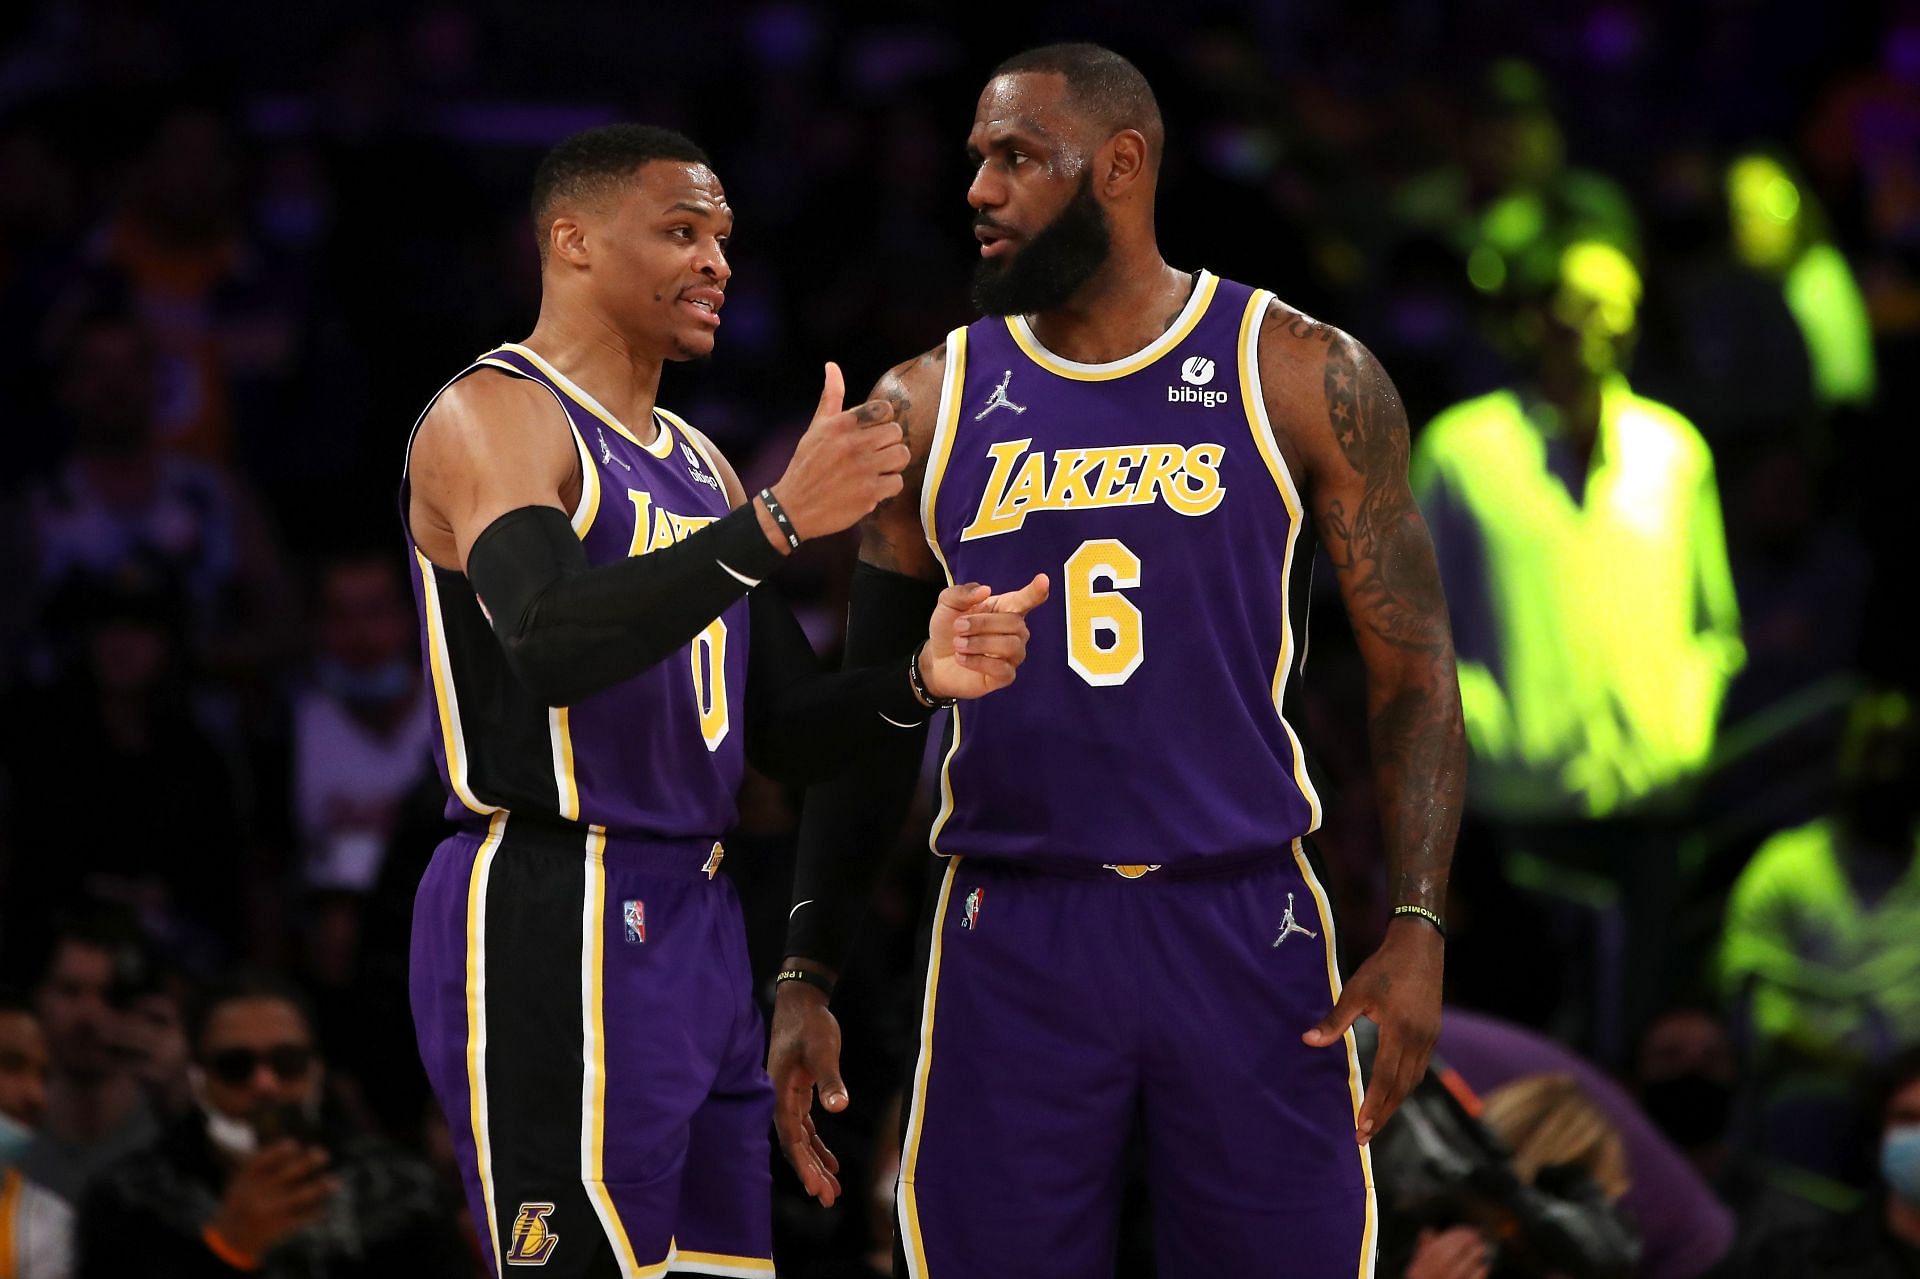 LeBron James and Russell Westbrook of the LA Lakers